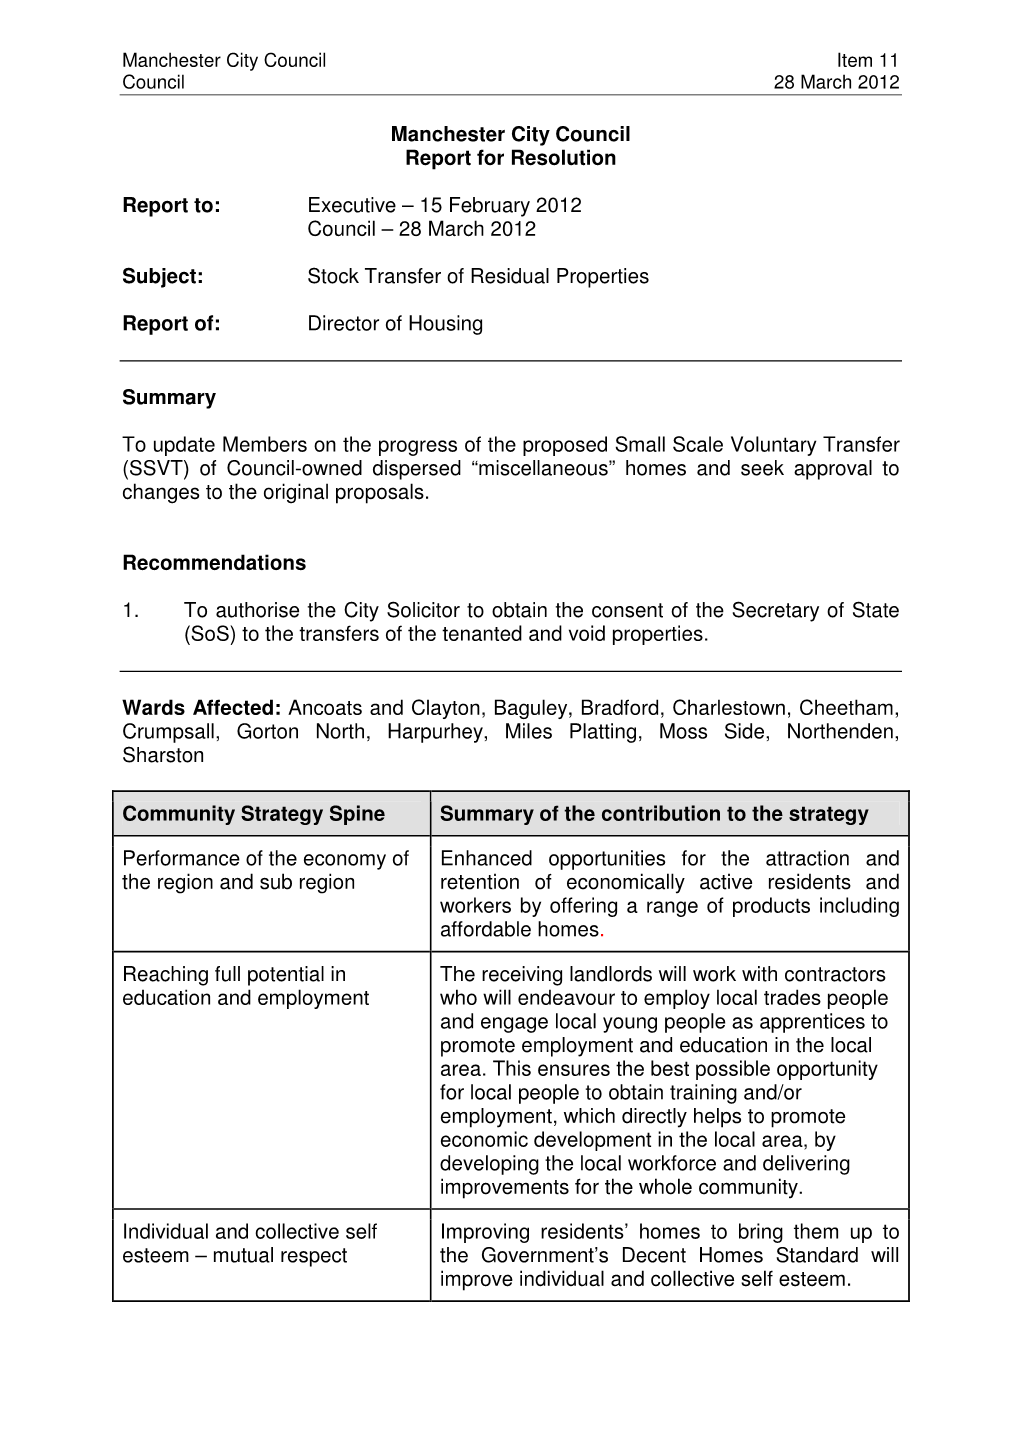 Stock Transfer of Residual Properties Report to Council 28 March 2012